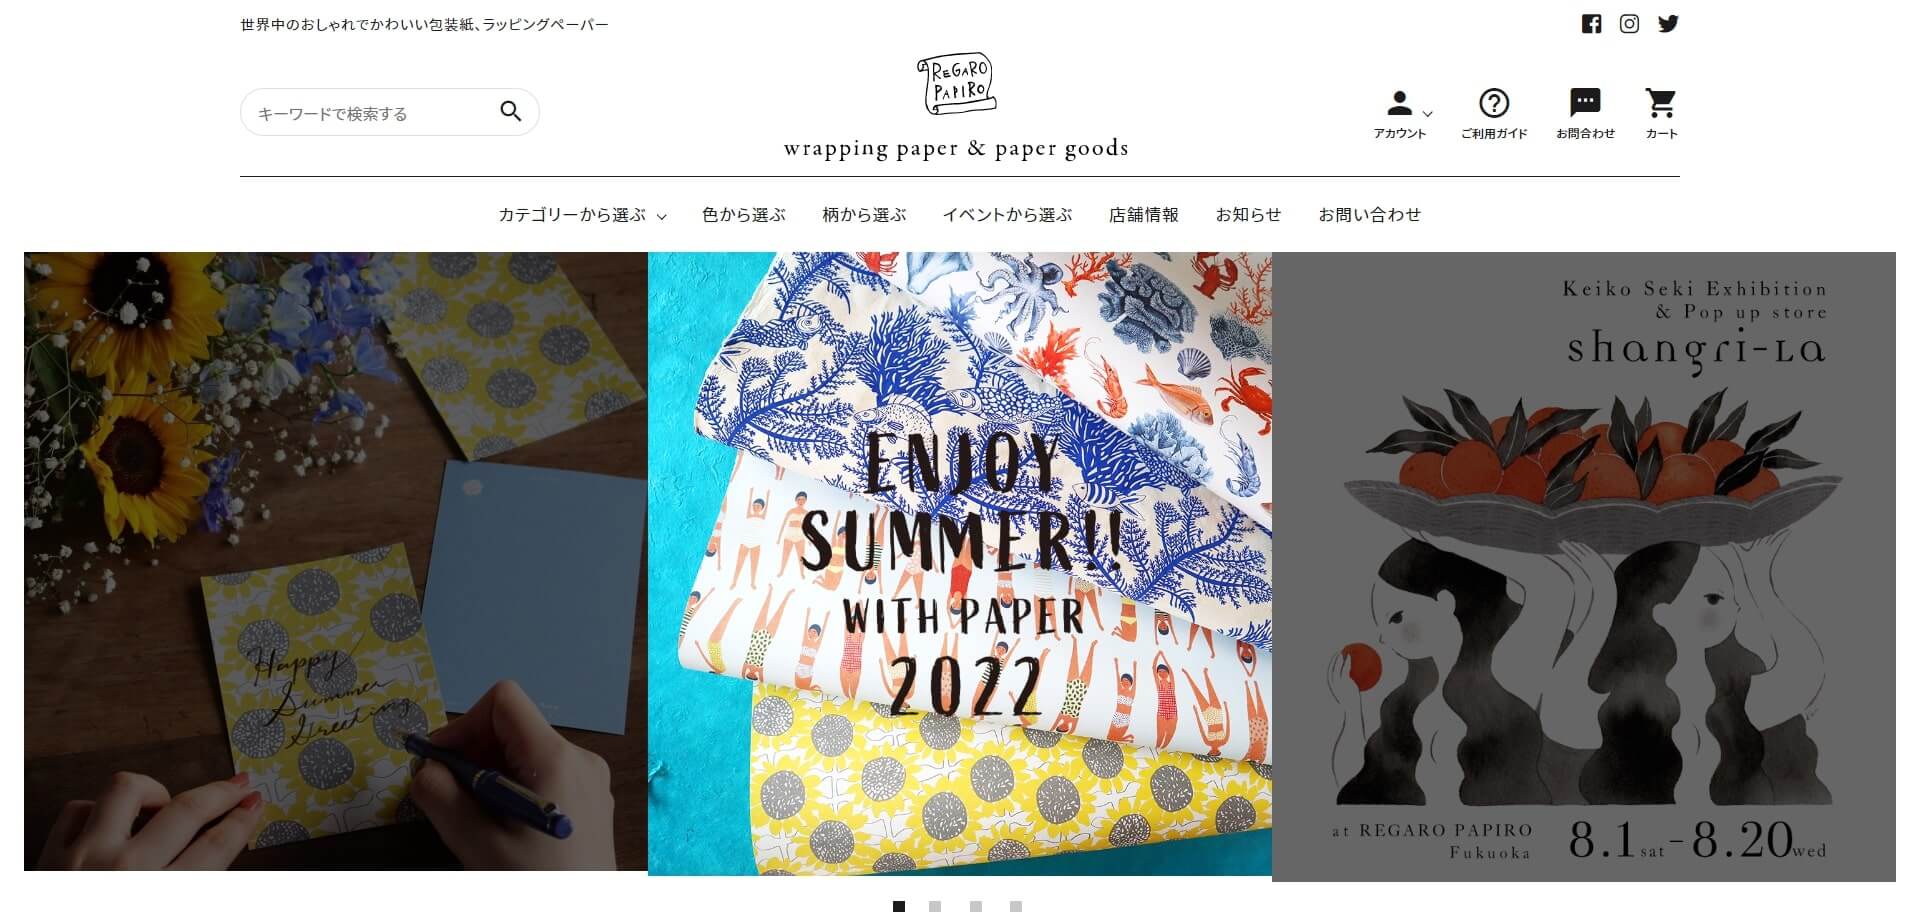 wrapping paper&paper goods